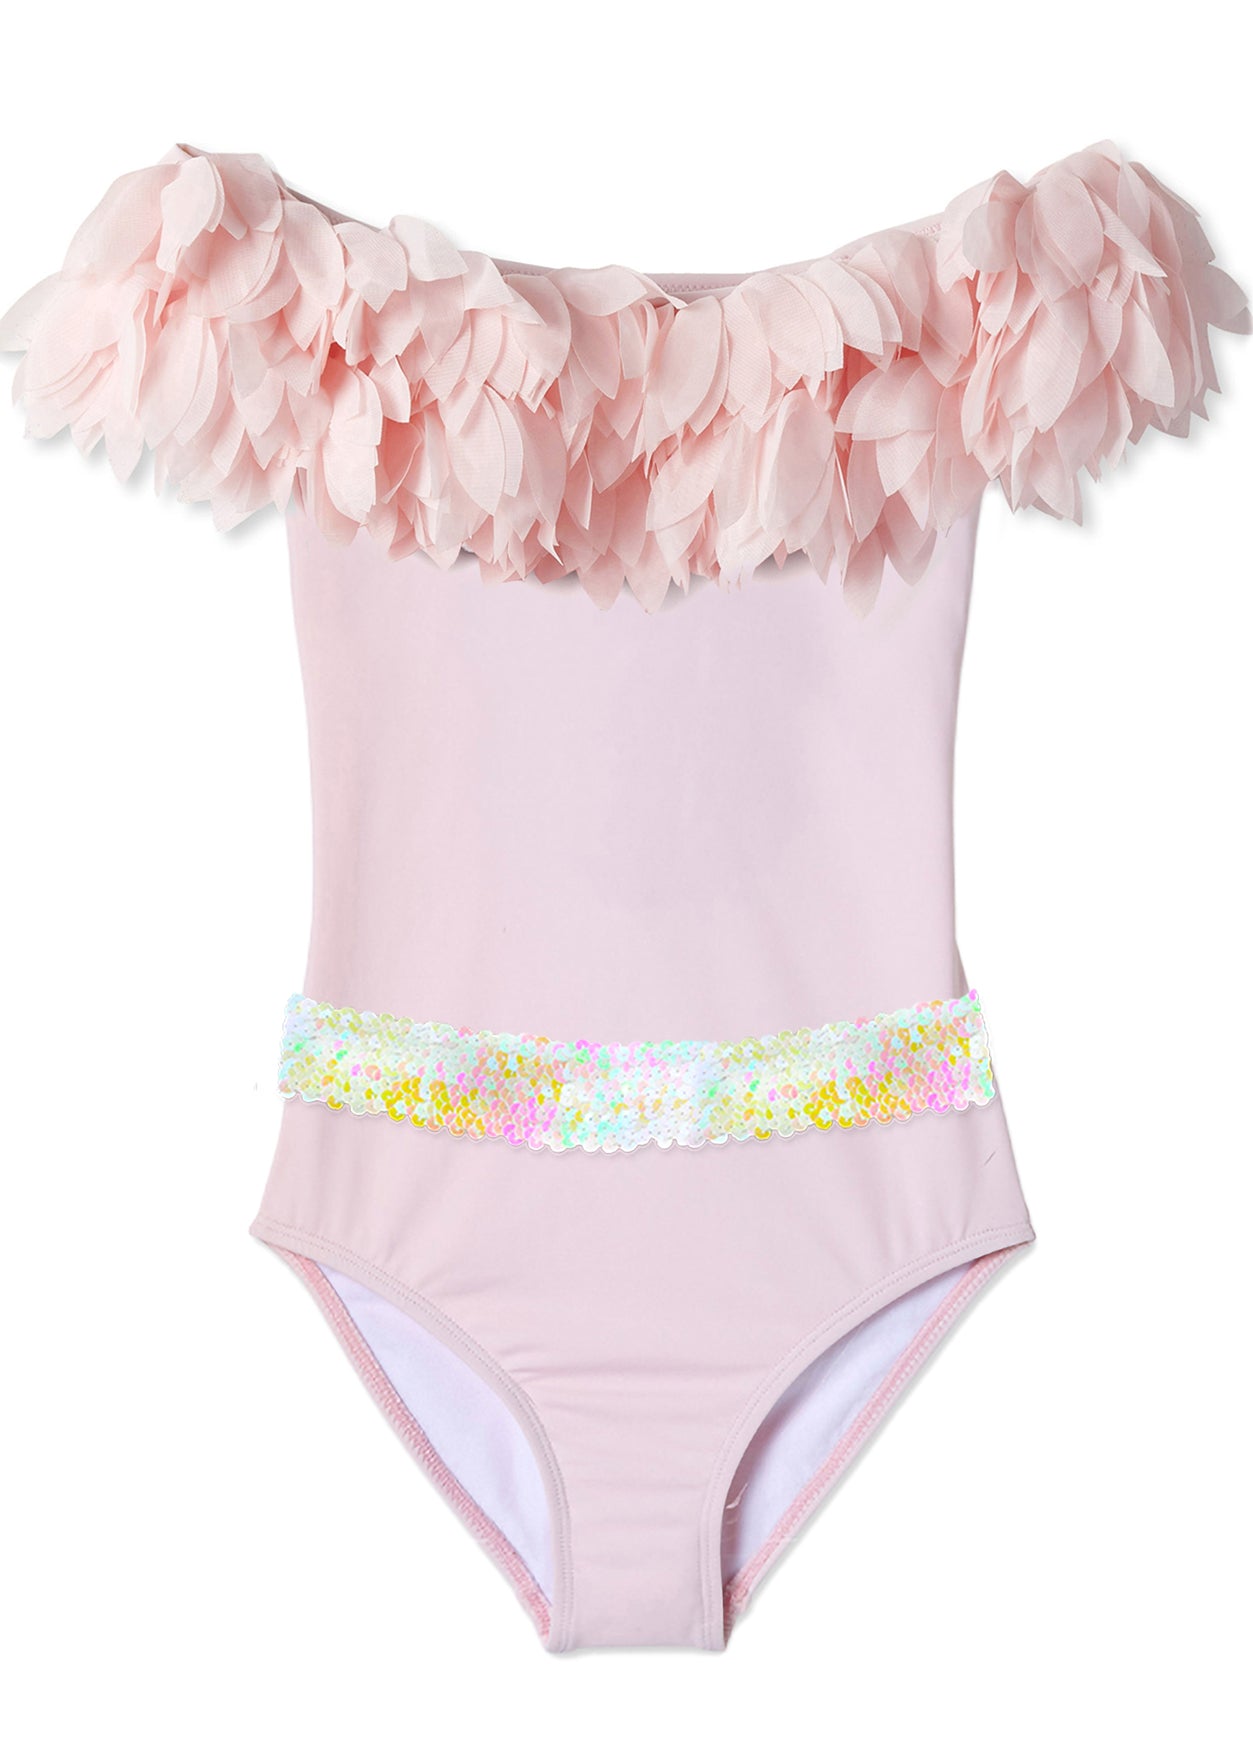 pink swimsuit for girls, pink bathing suit for girls